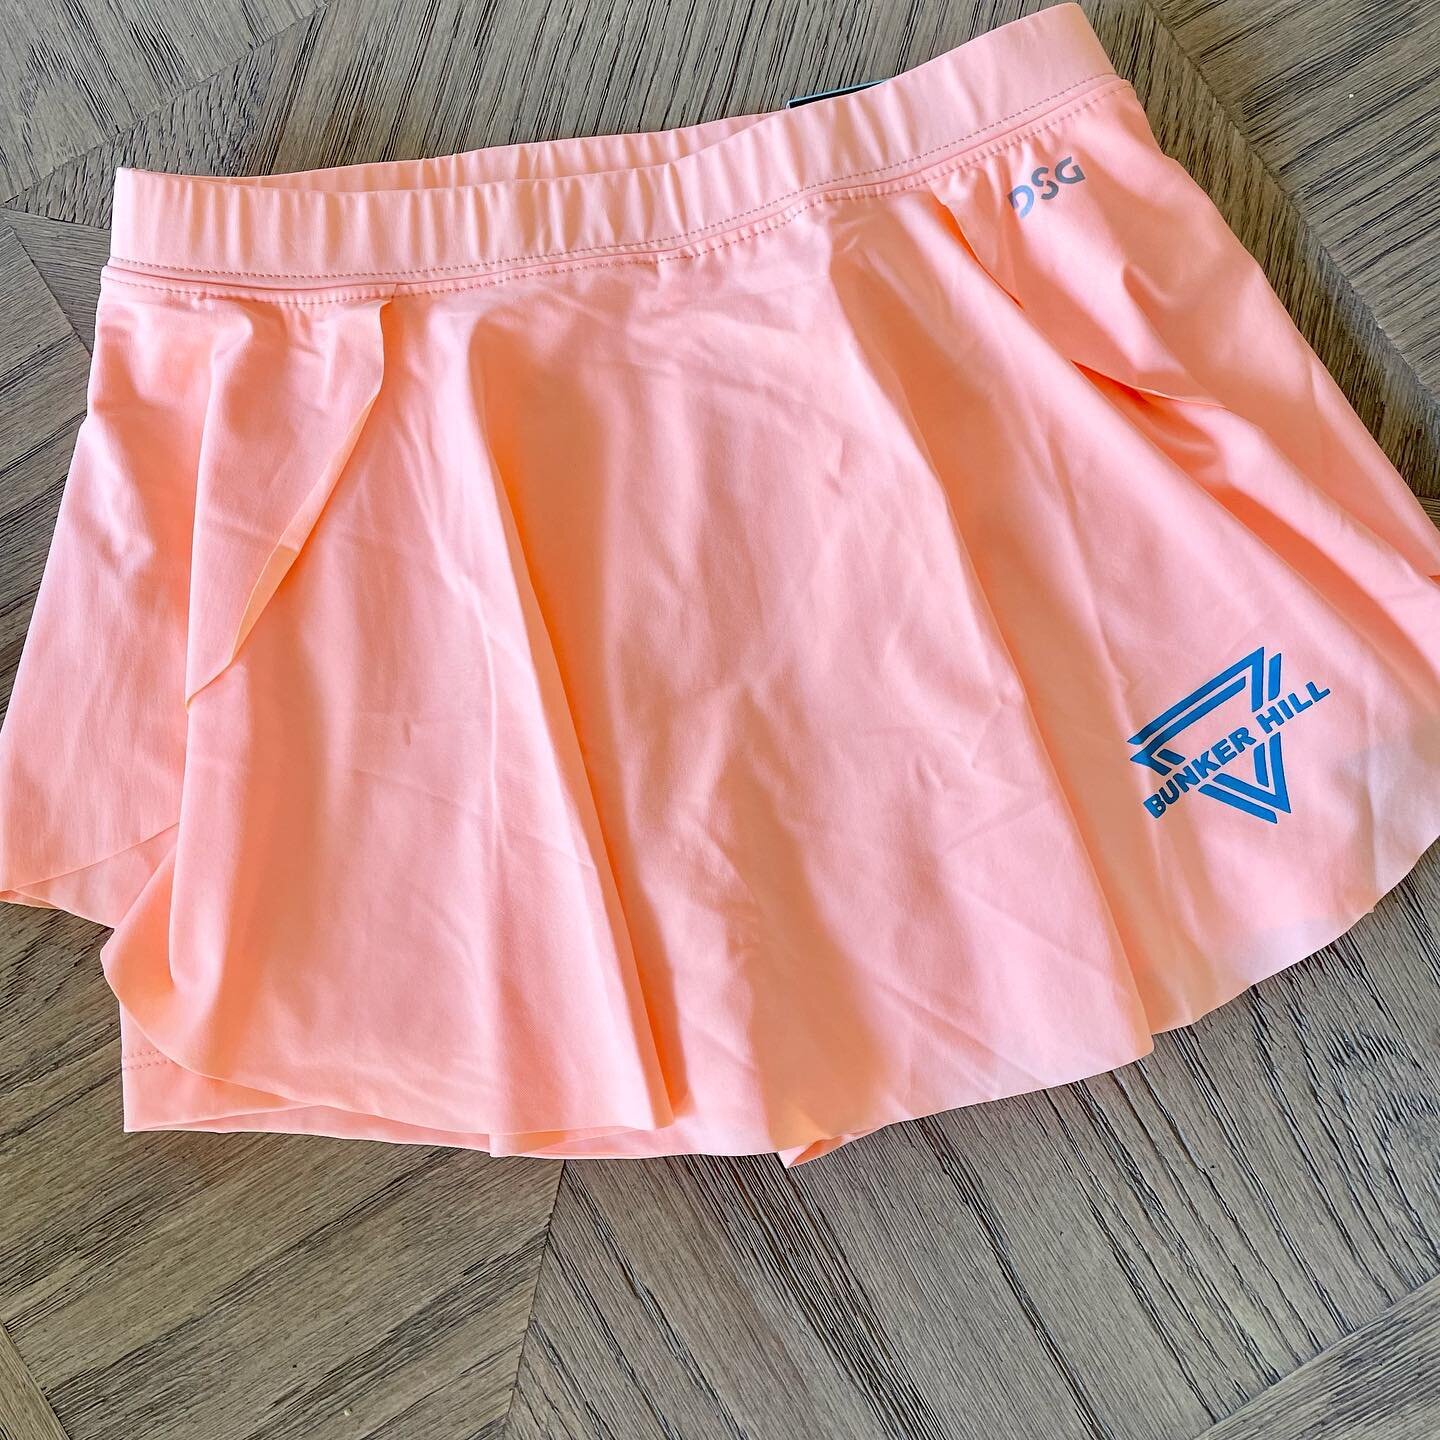 For anyone looking for a Kiki Kona-type skirt for your school spirit store, this DSG girls skirt was a great find! Can&rsquo;t wait to see the BHE girls in them.